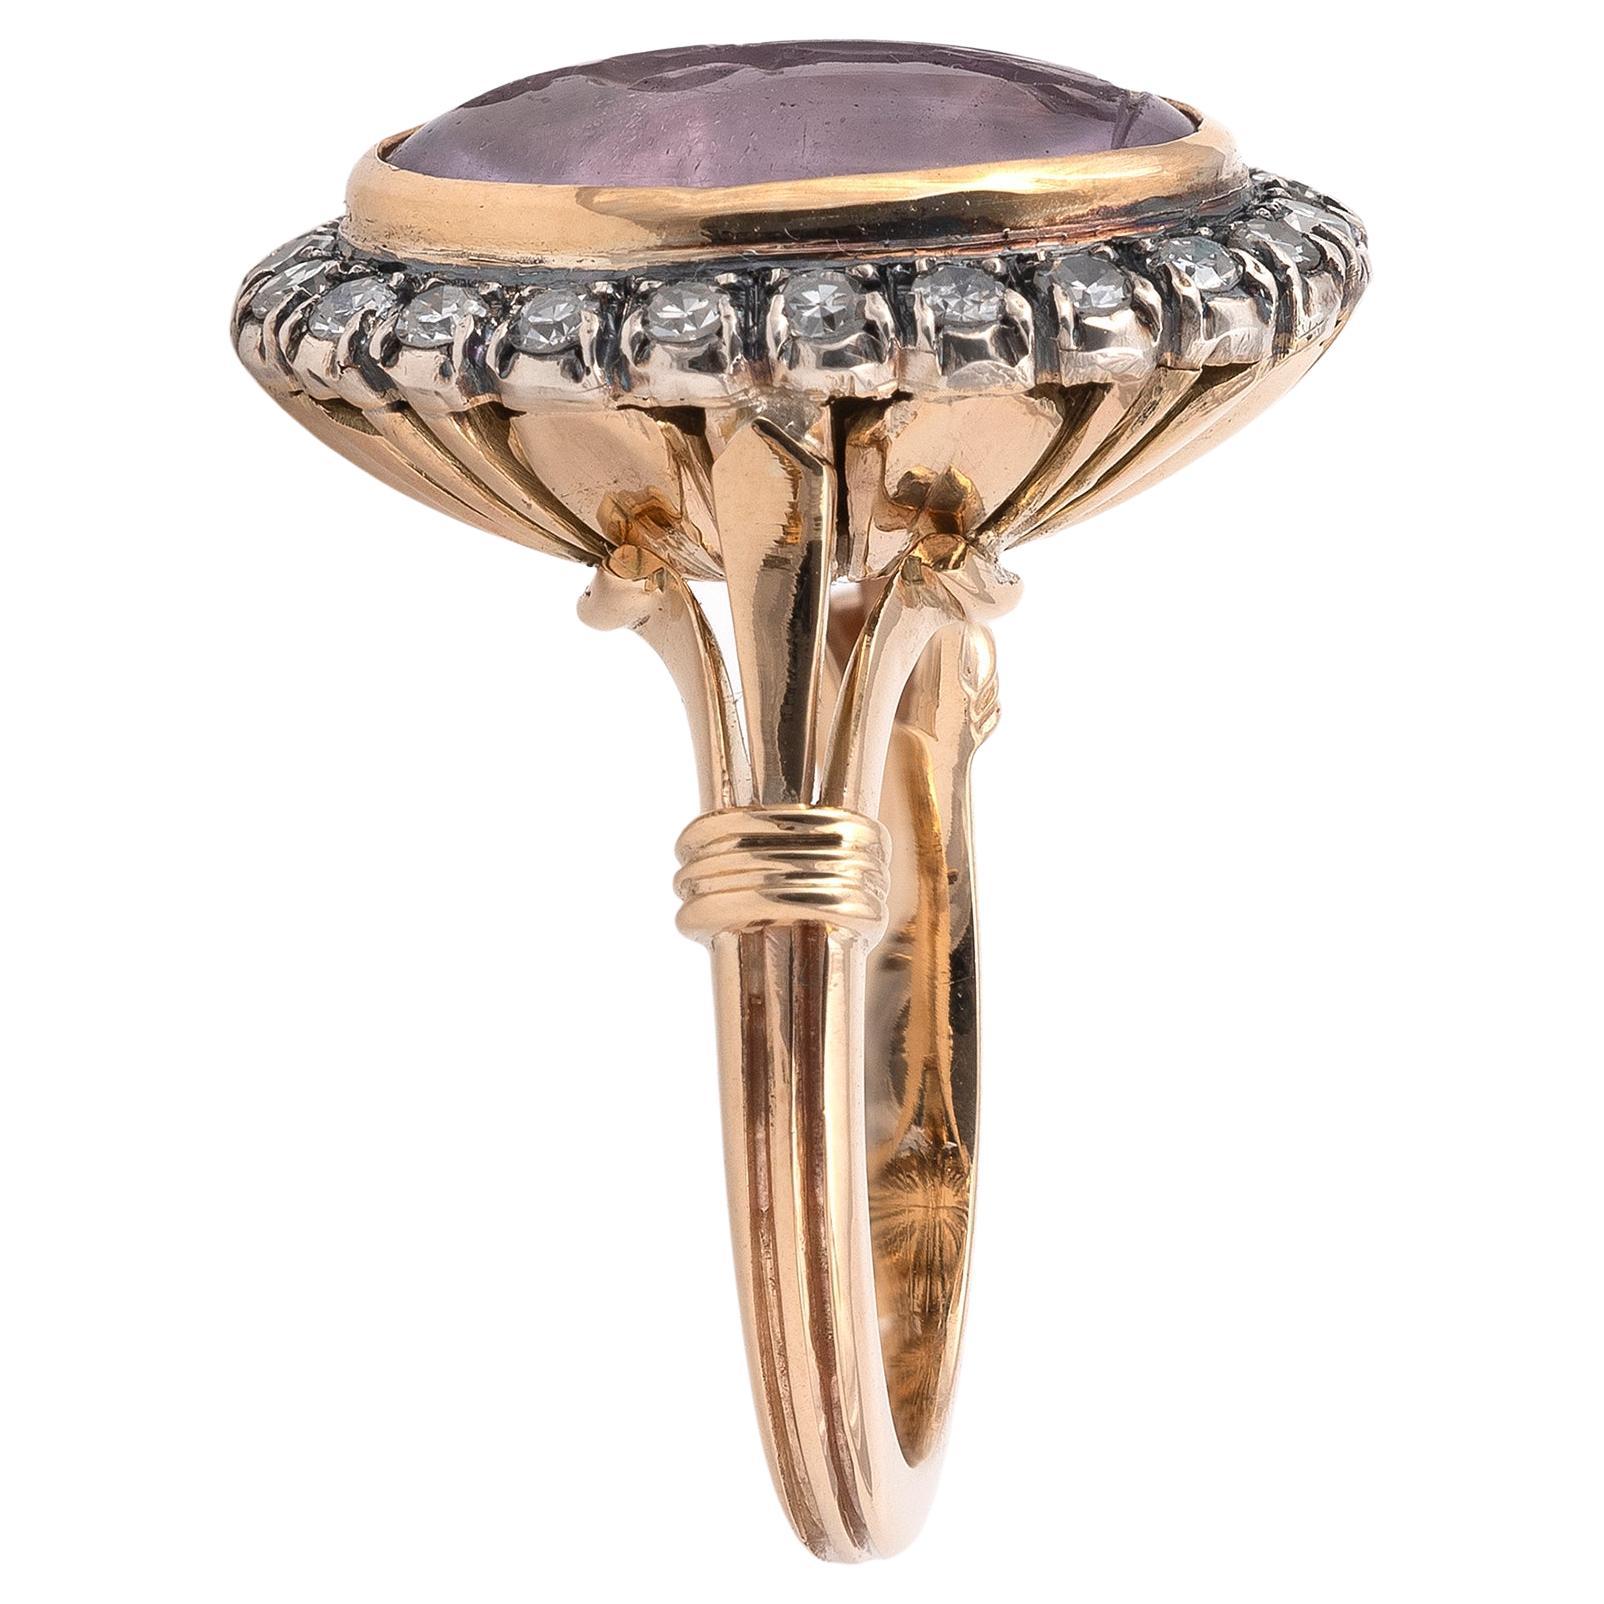 The oval amethyst intaglio, depicting Apollo standing full length beside a column, with bow and arrow drawn, mounted in silver and gold, ring size 7
length 1.9cm, width 1.6cm
Weight: 10,8gr.